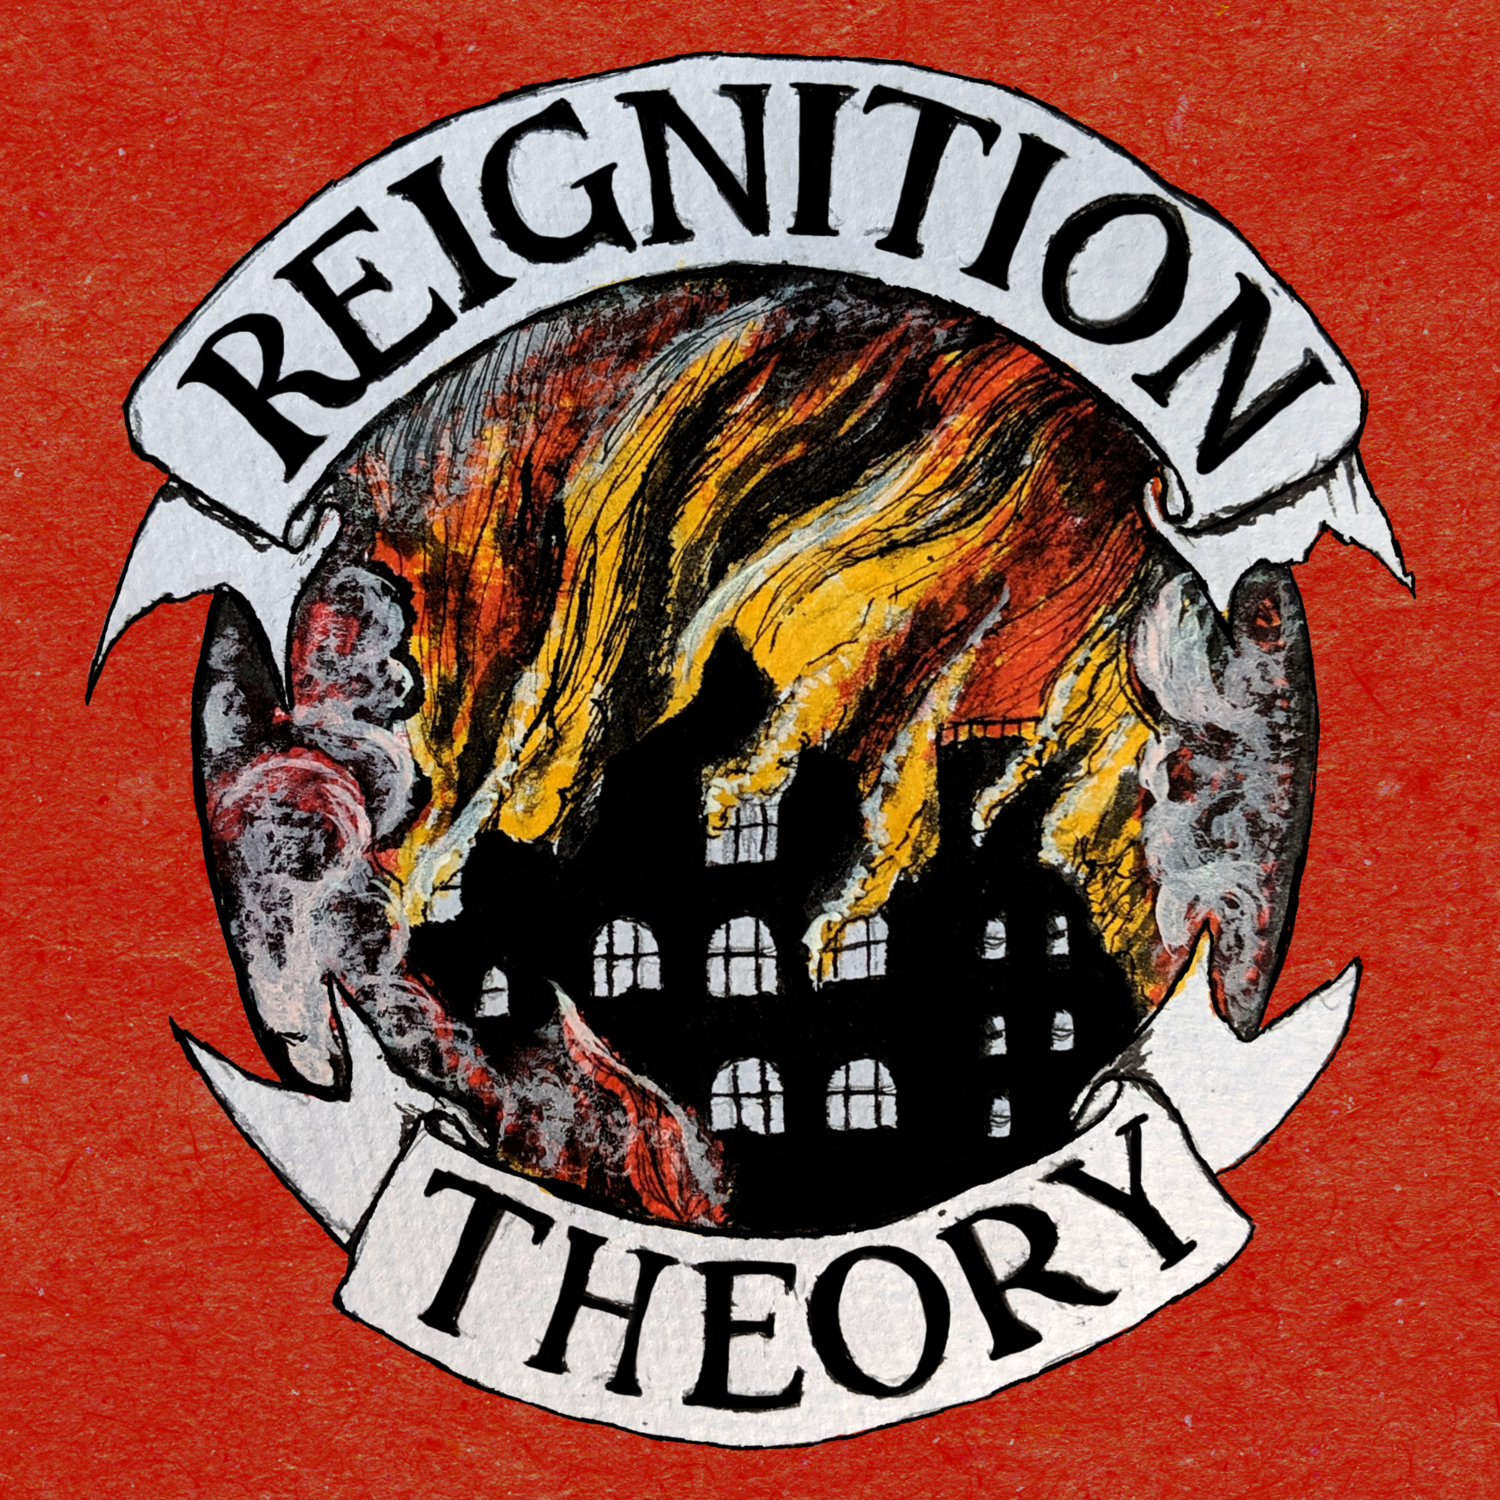 Episode 11 - Conspiracy - The Reignition Theory